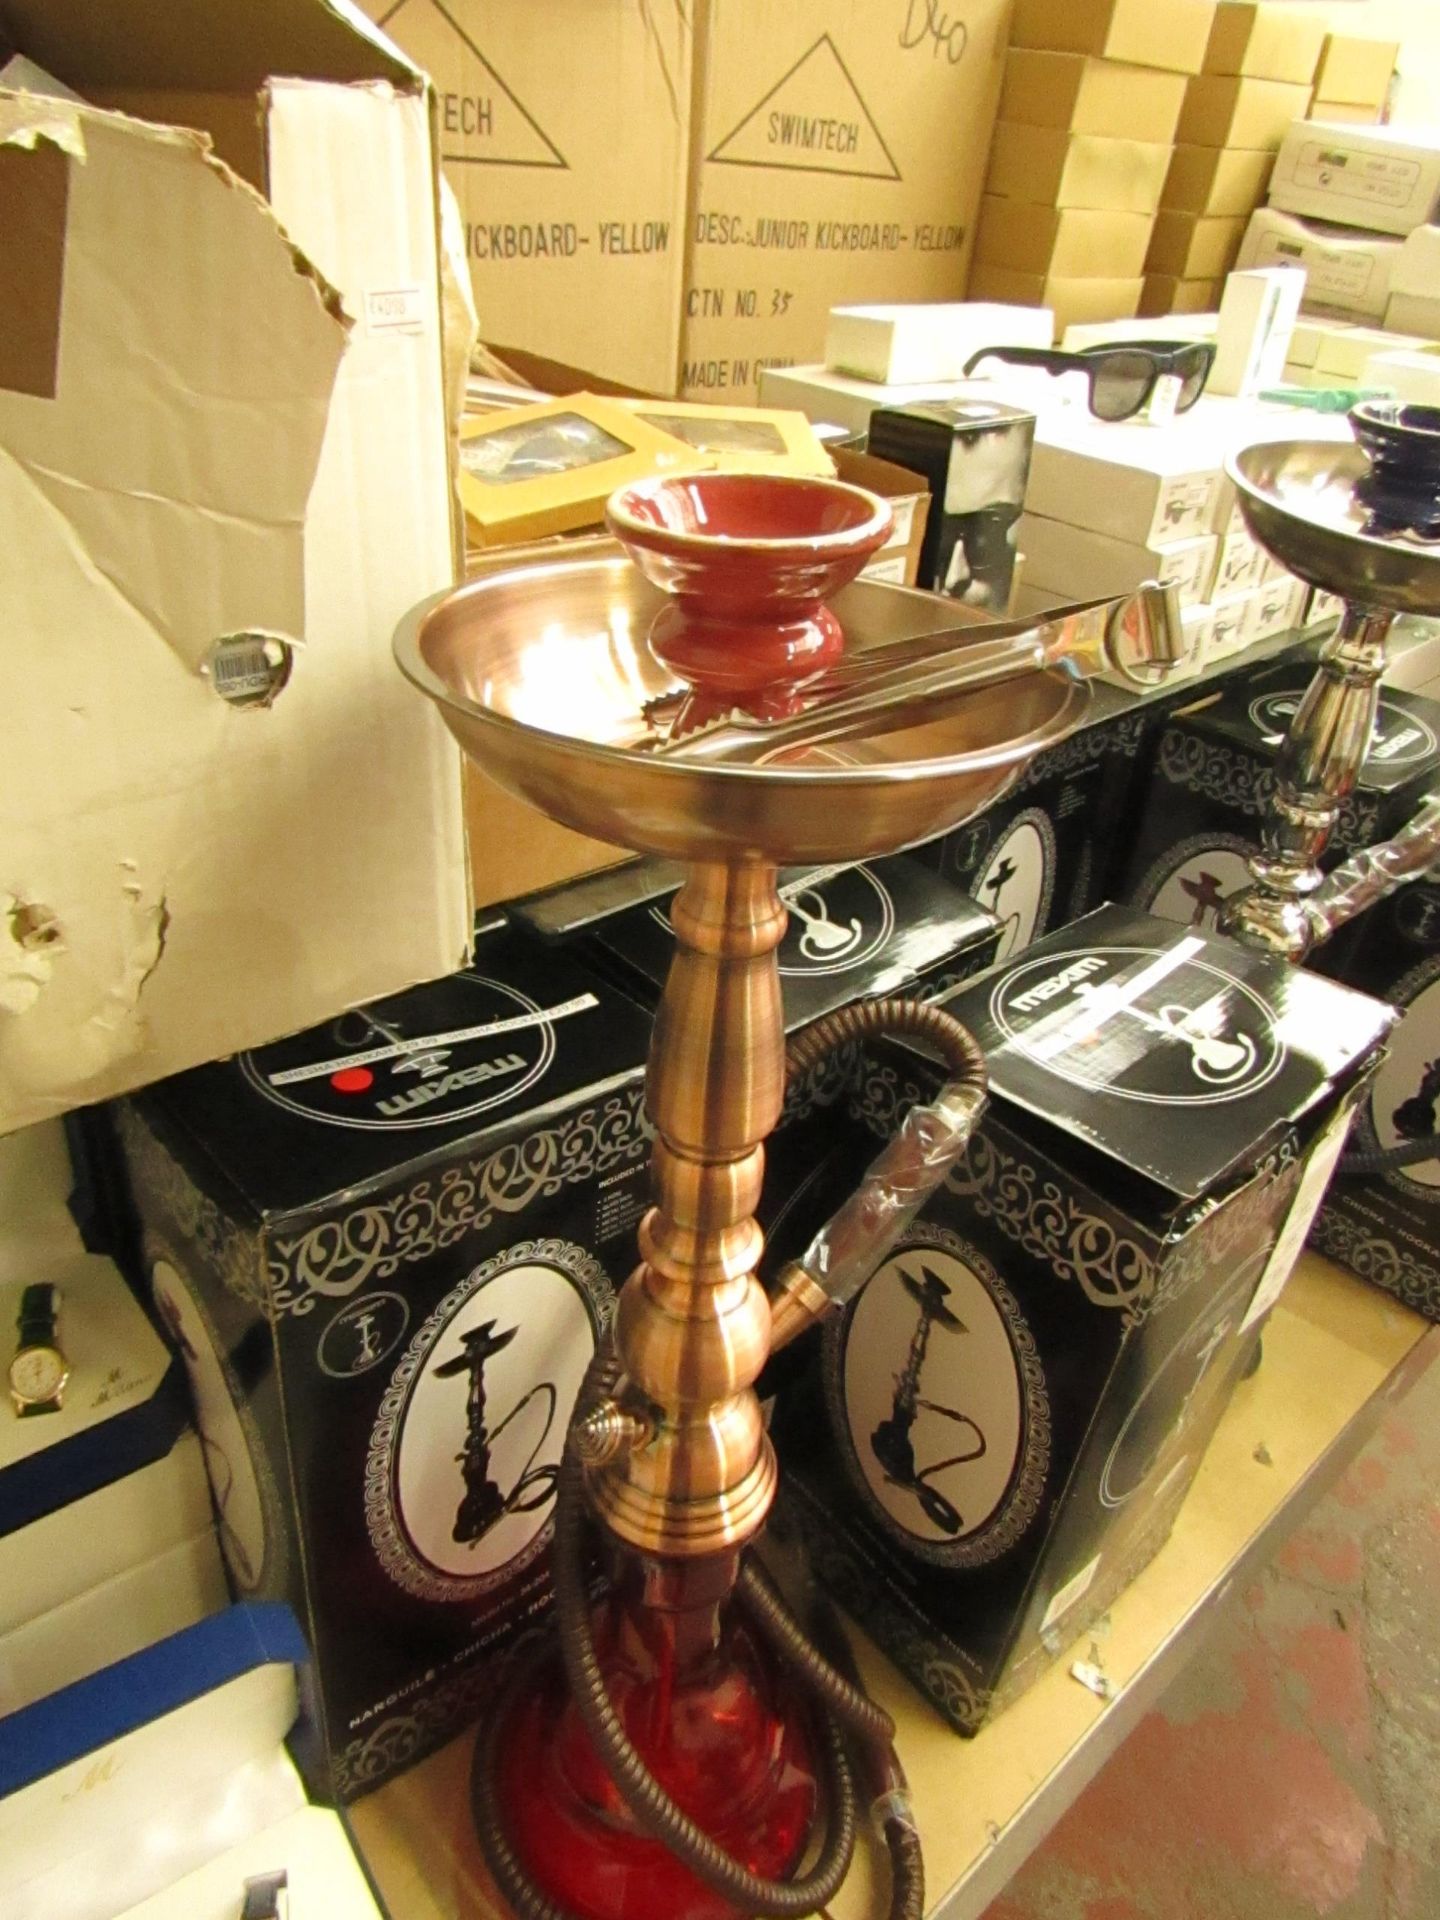 Shisha / Hookah red bowl with bronze metalwork 25" tall, new and boxed.